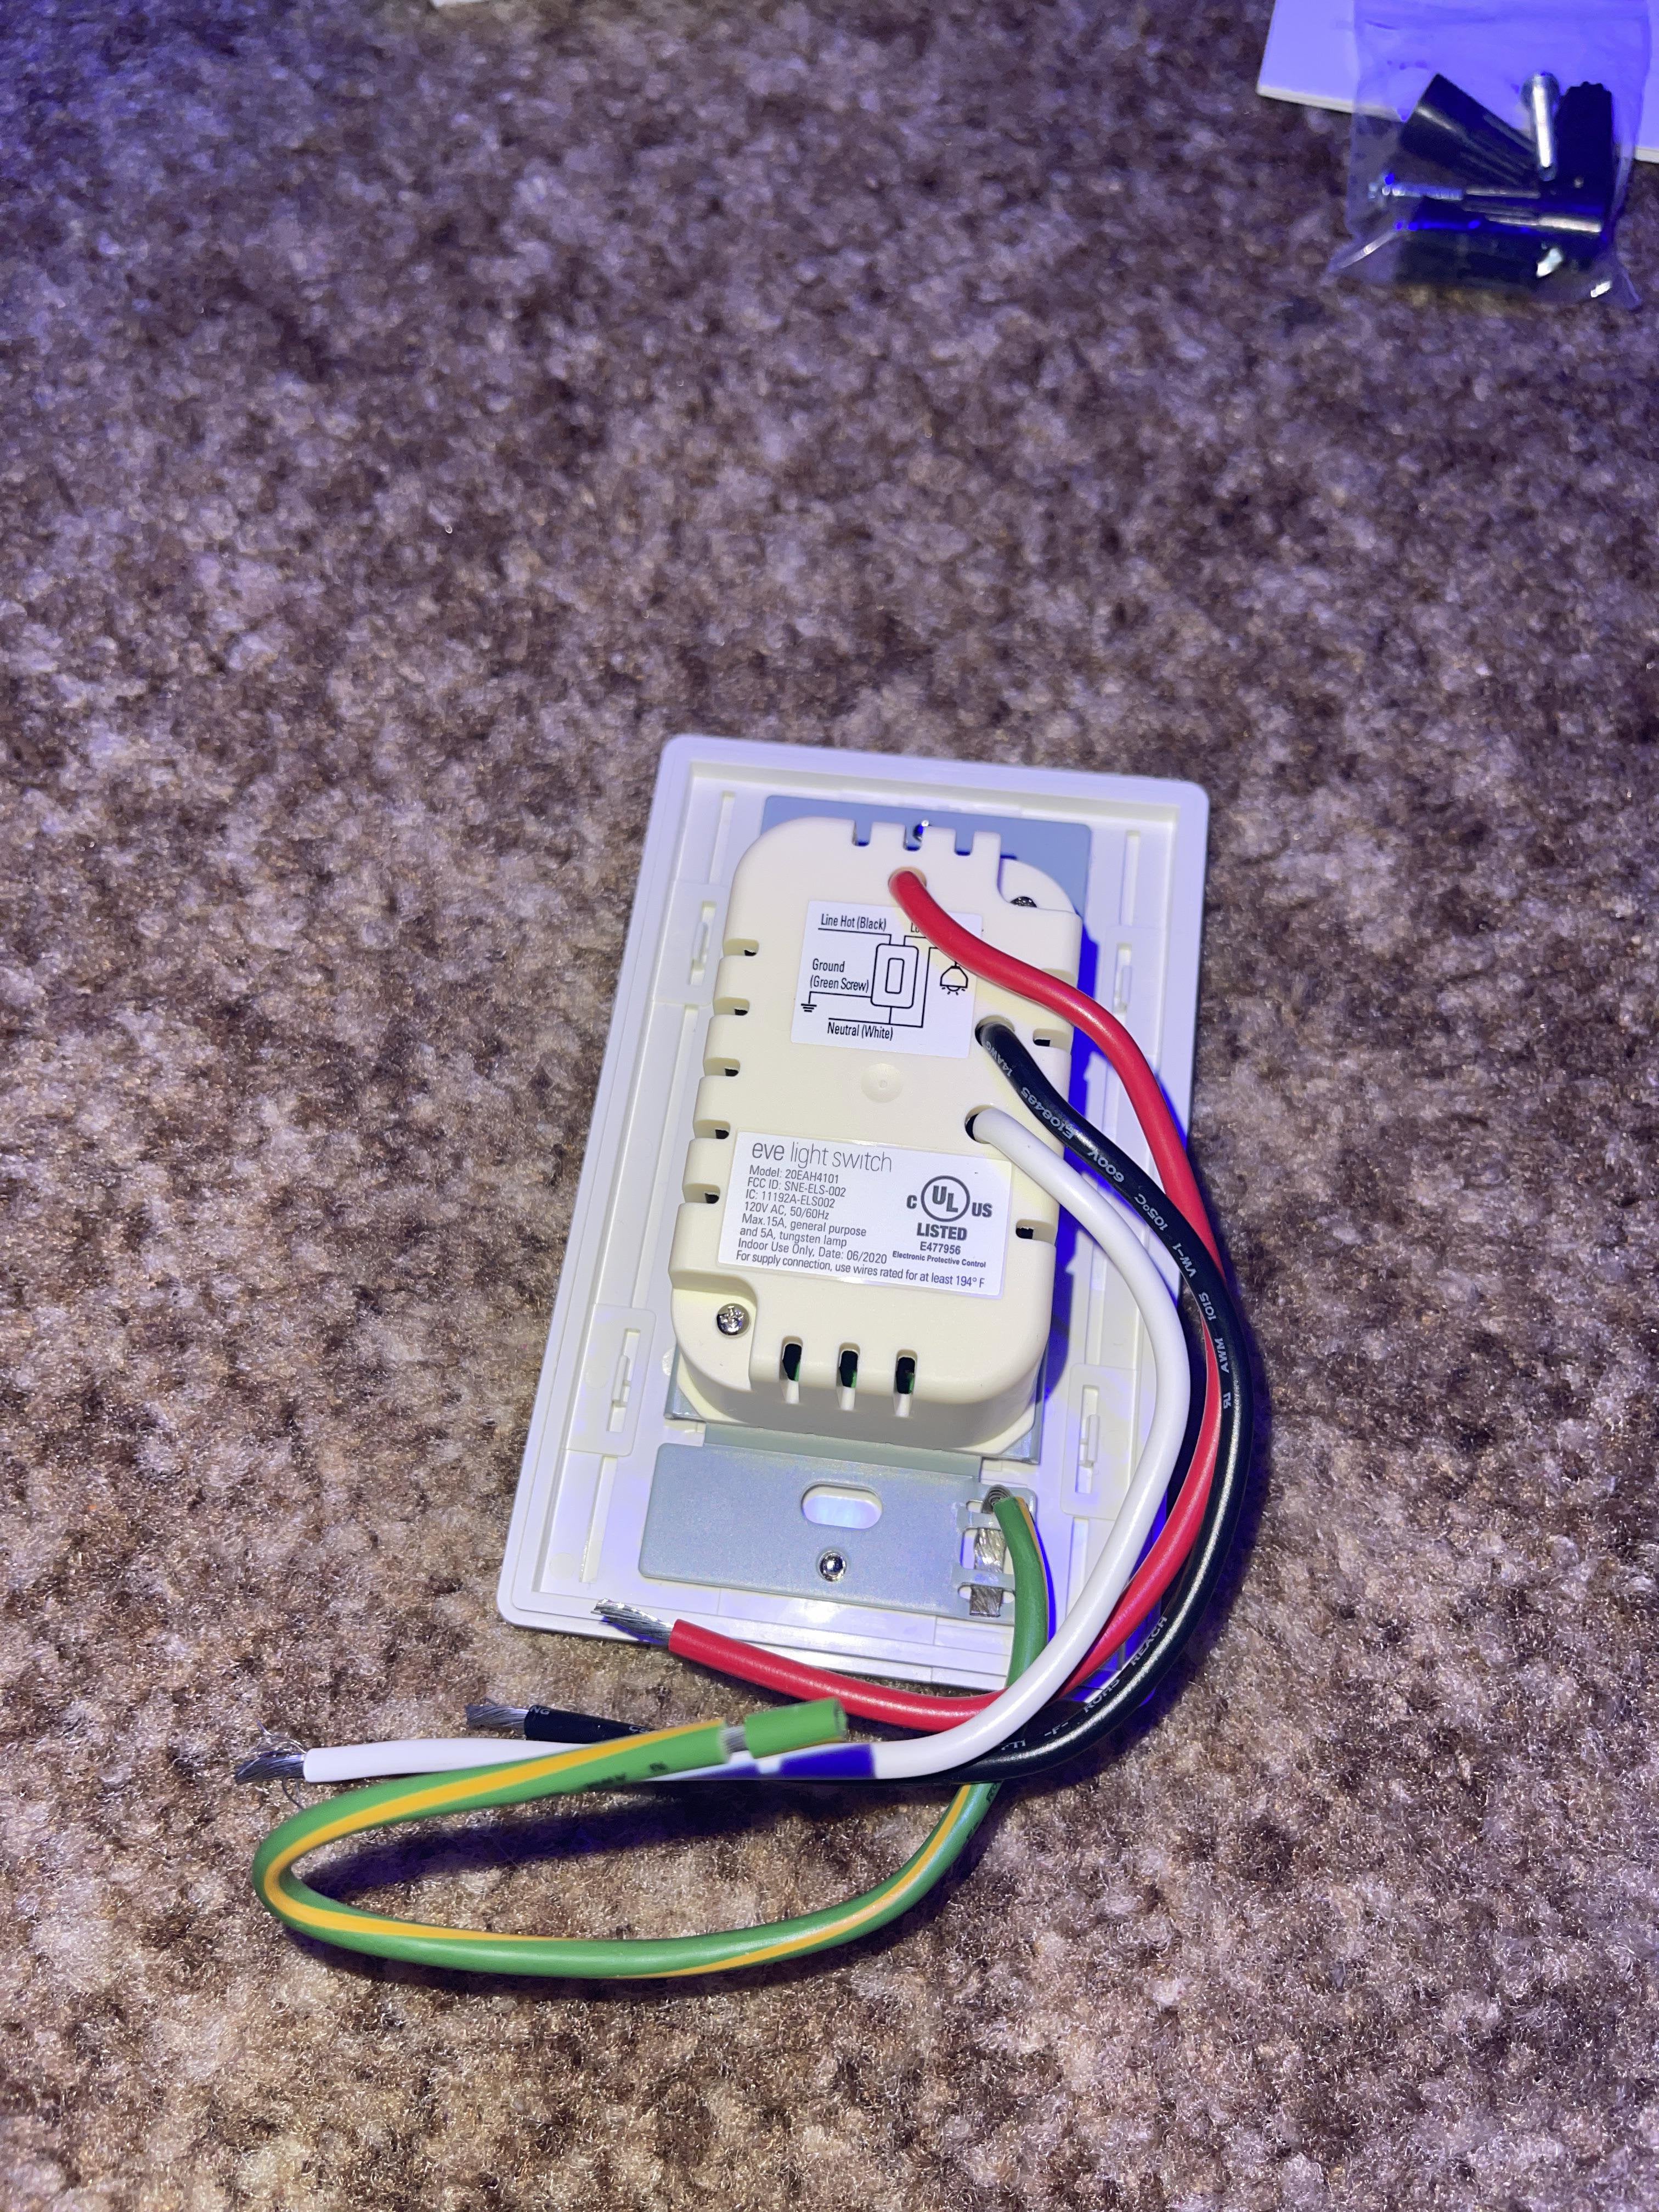 Help with Eve Light Switch